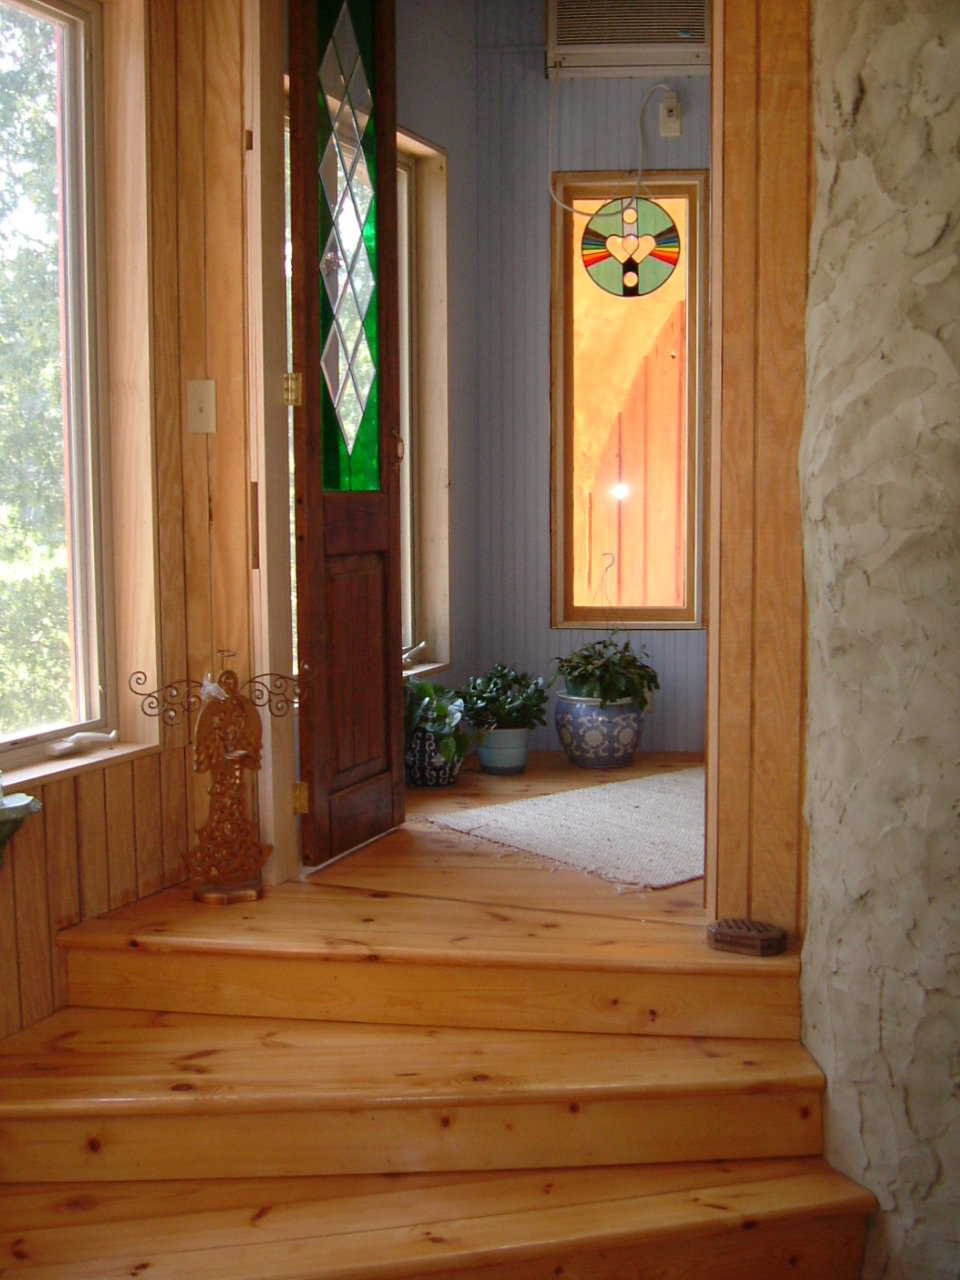 Come in, please! – A beautifully finished, wood-enhanced entry welcomes visitors to Cloudome.